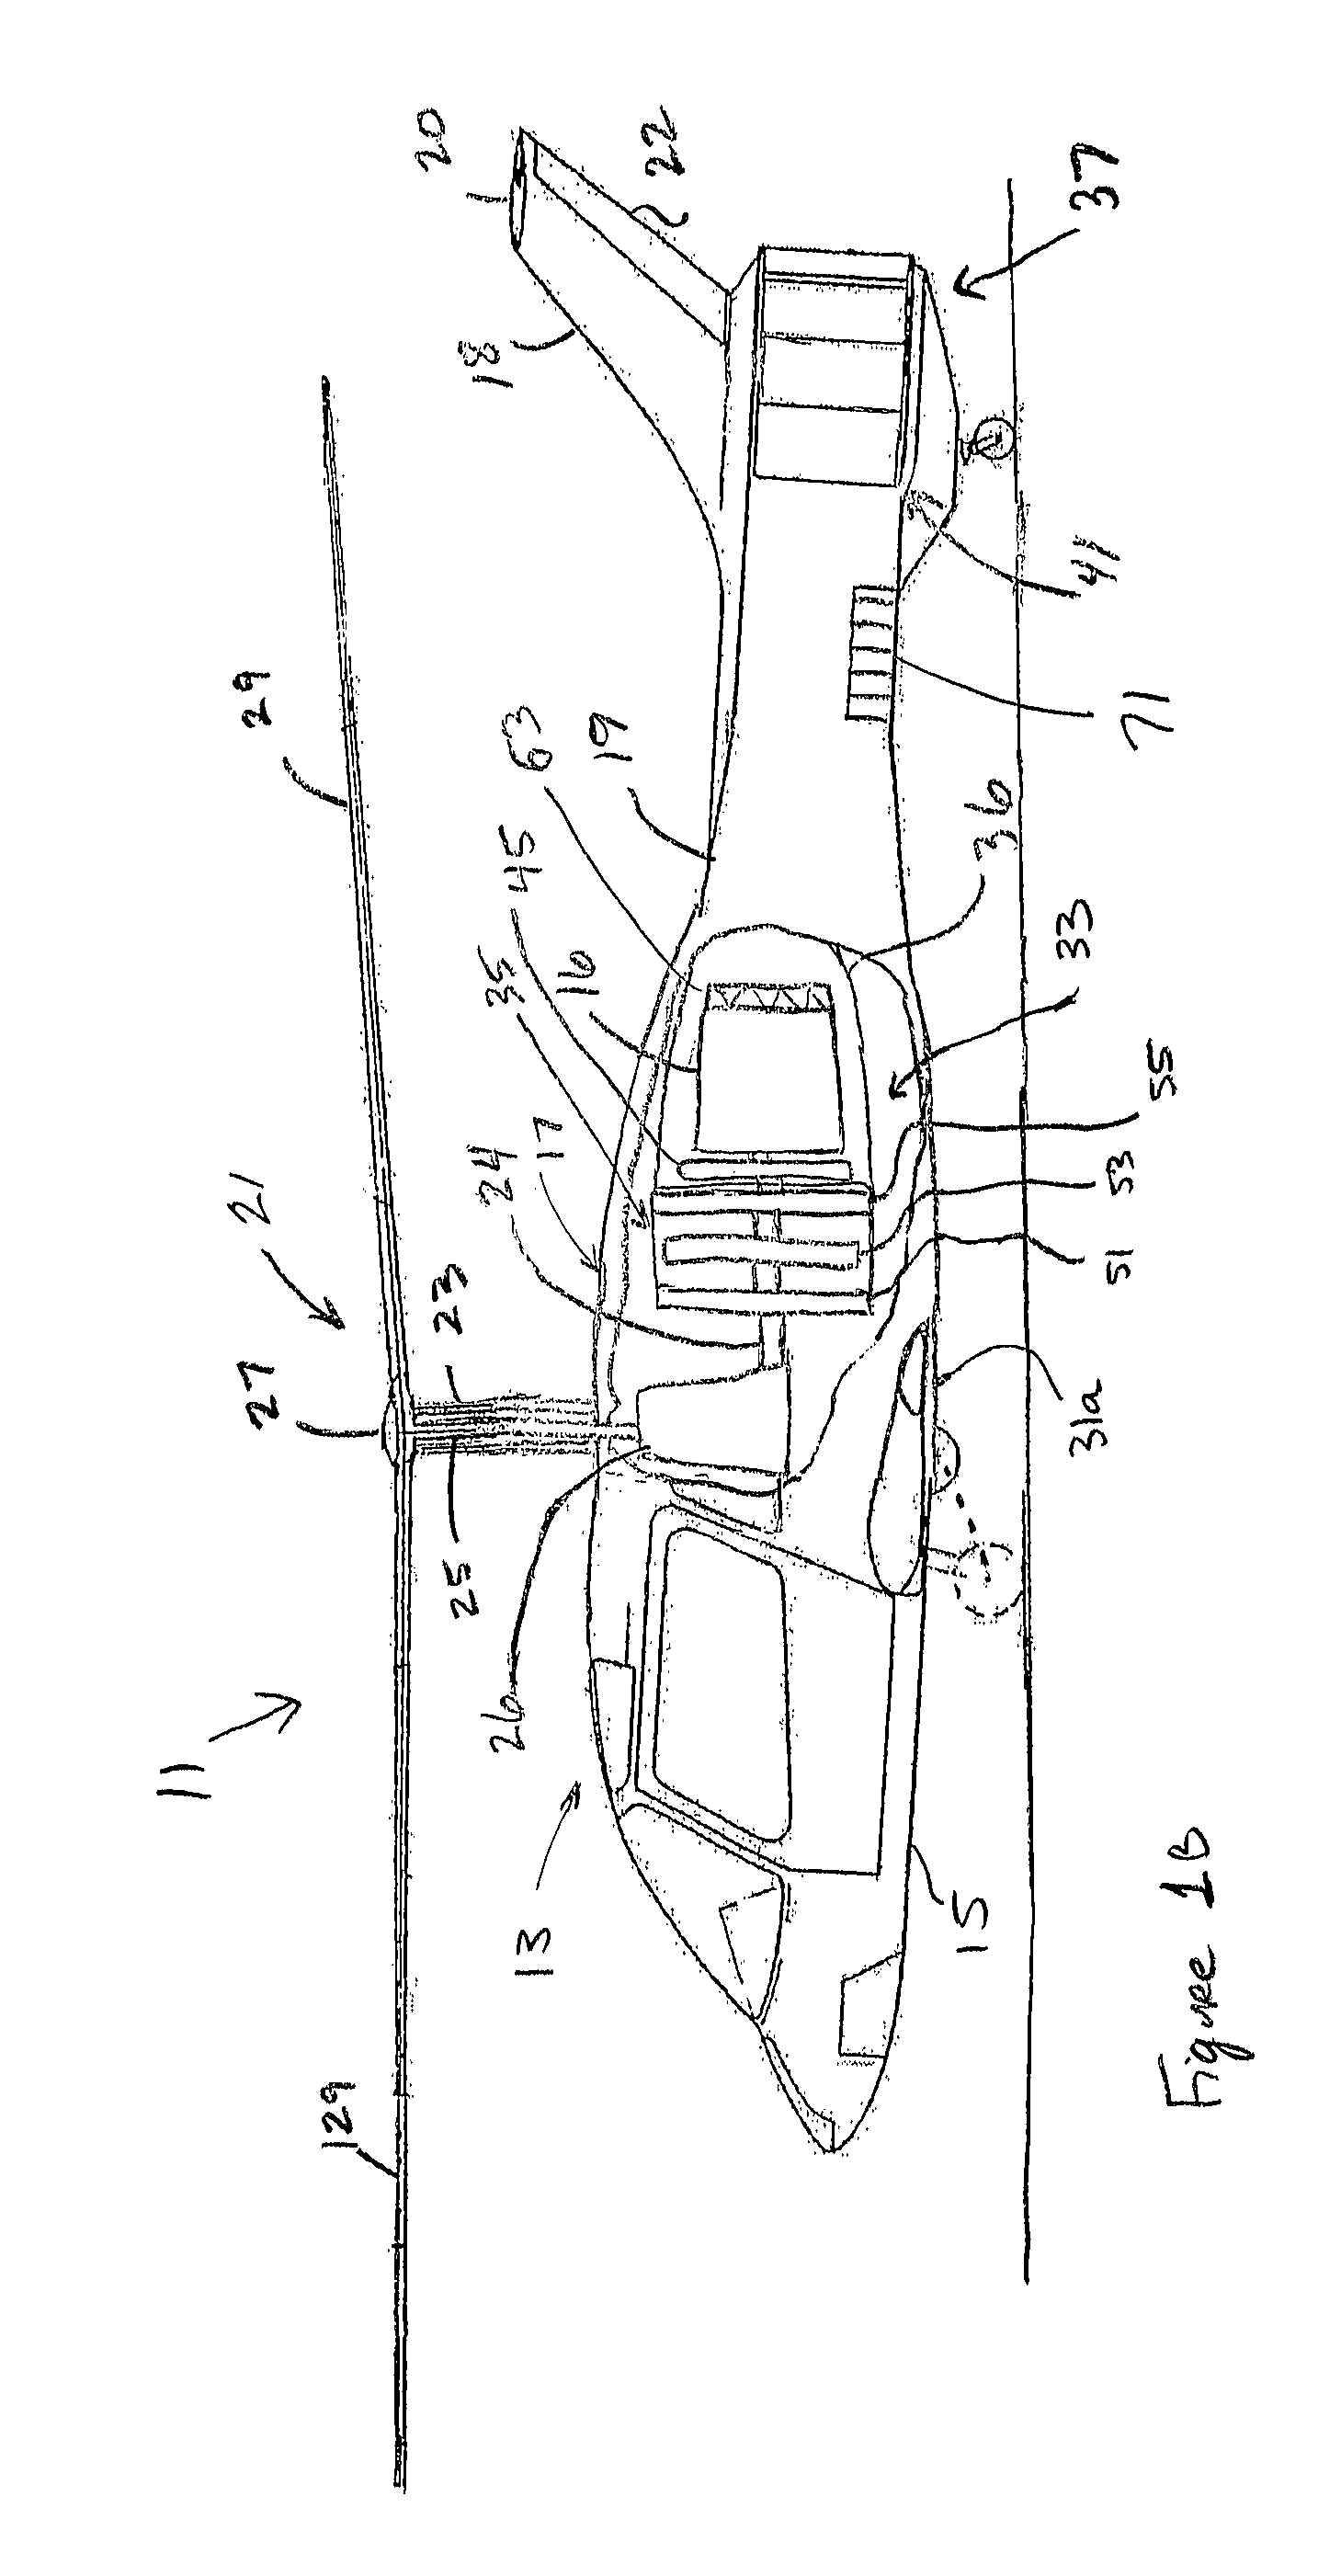 Propulsive anti-torque system for rotorcraft